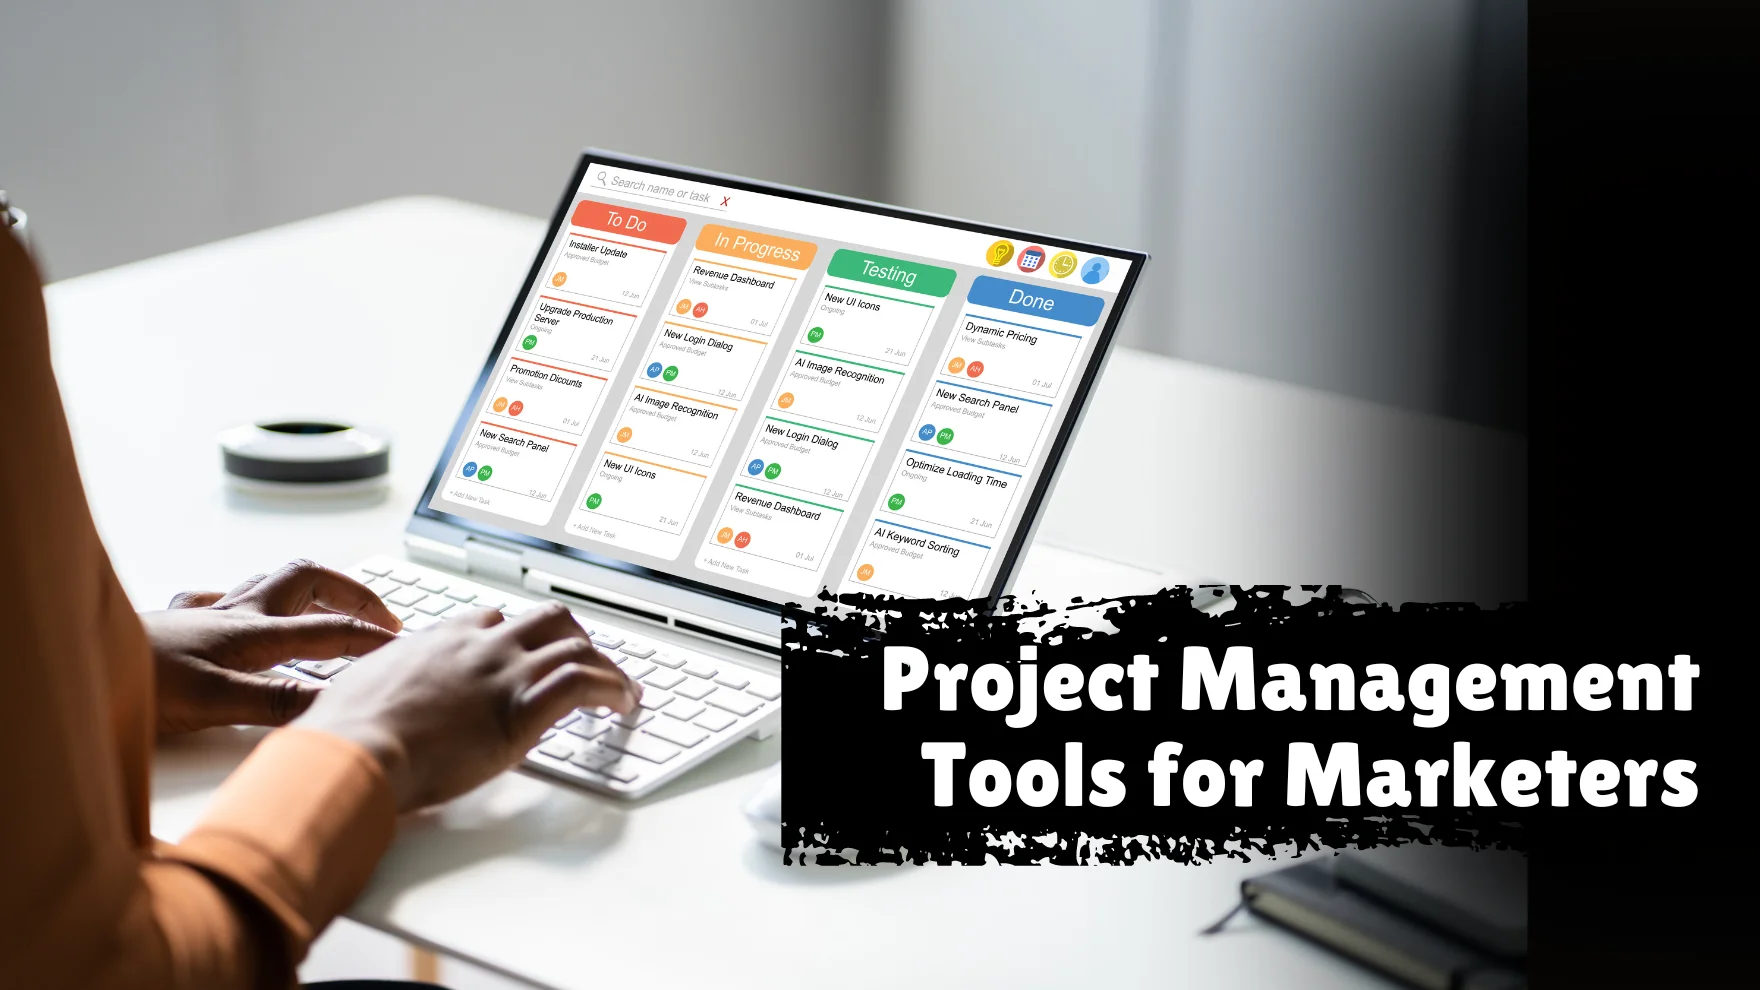 Project Management Tools for Marketers